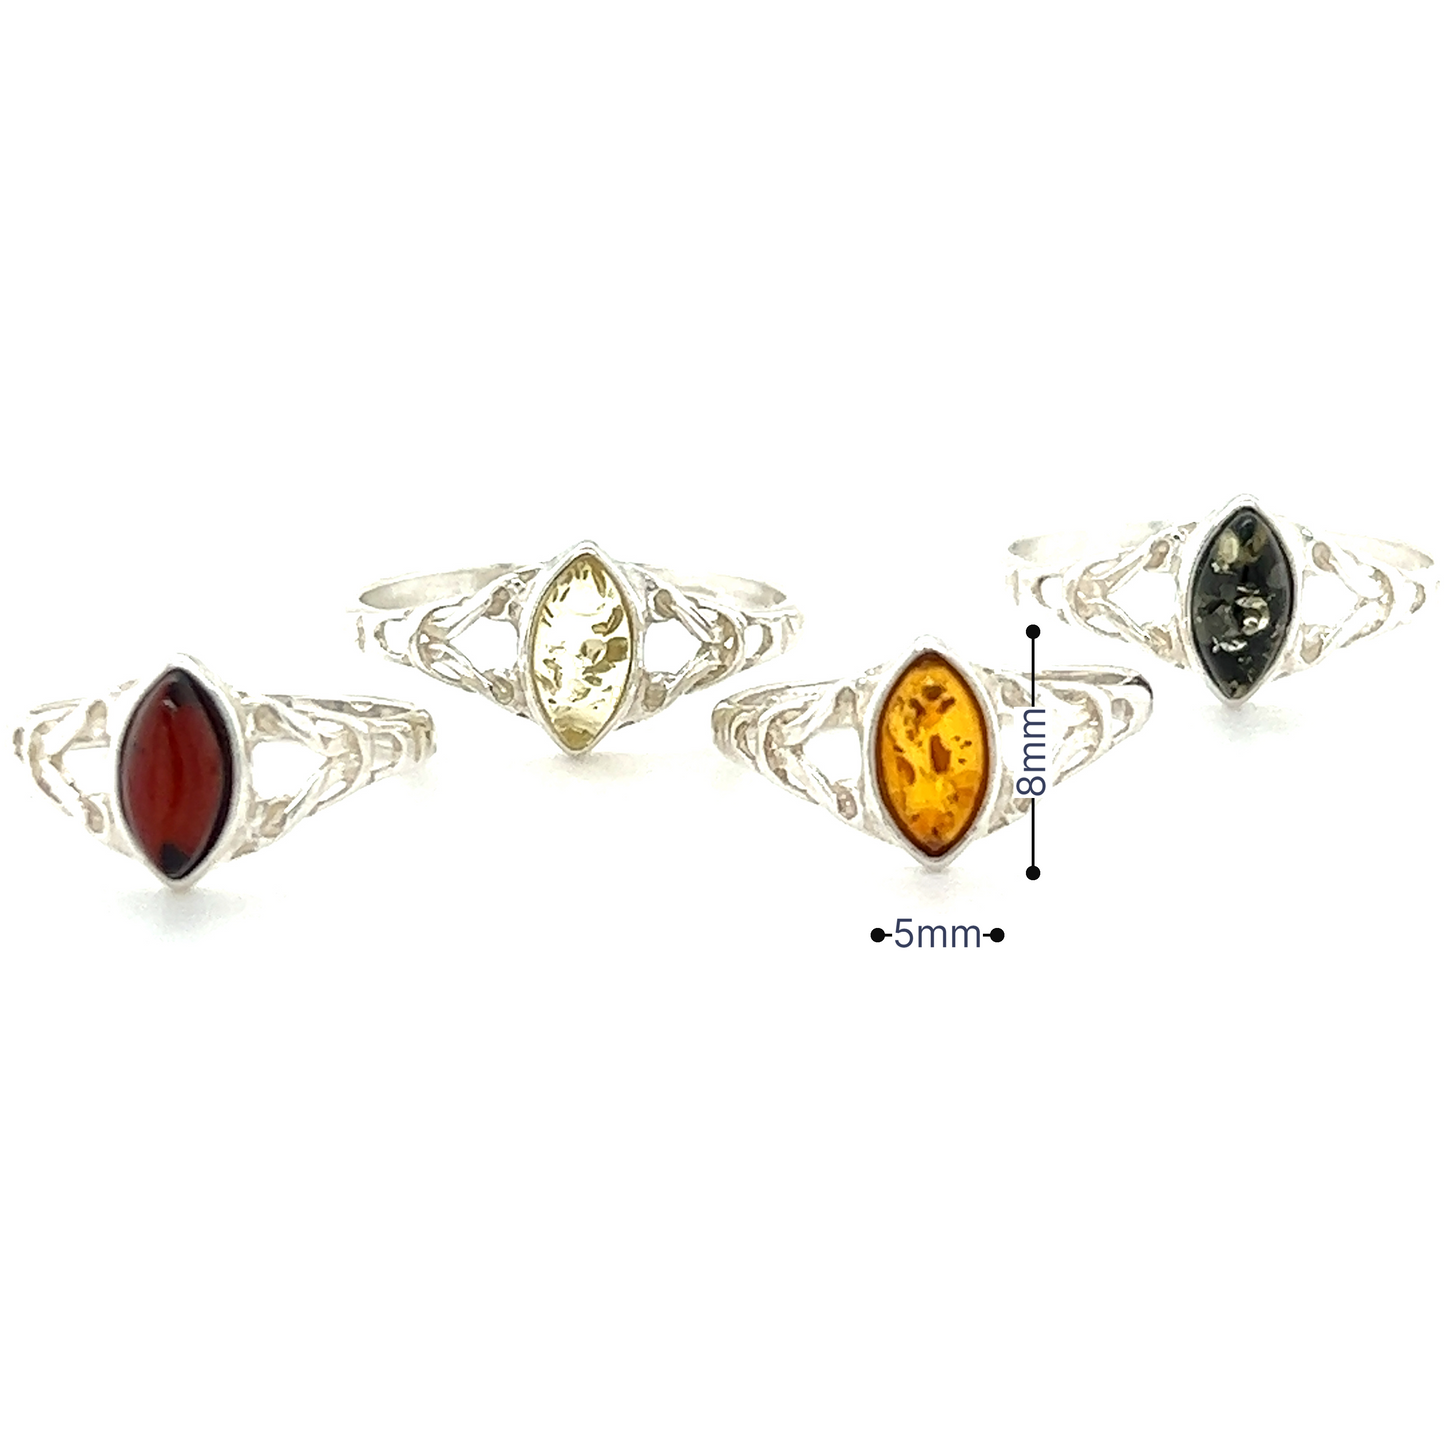 A Delicate Celtic Inspired Amber Ring adorned with Baltic amber stones, promoting healing and spiritual growth, by Super Silver.